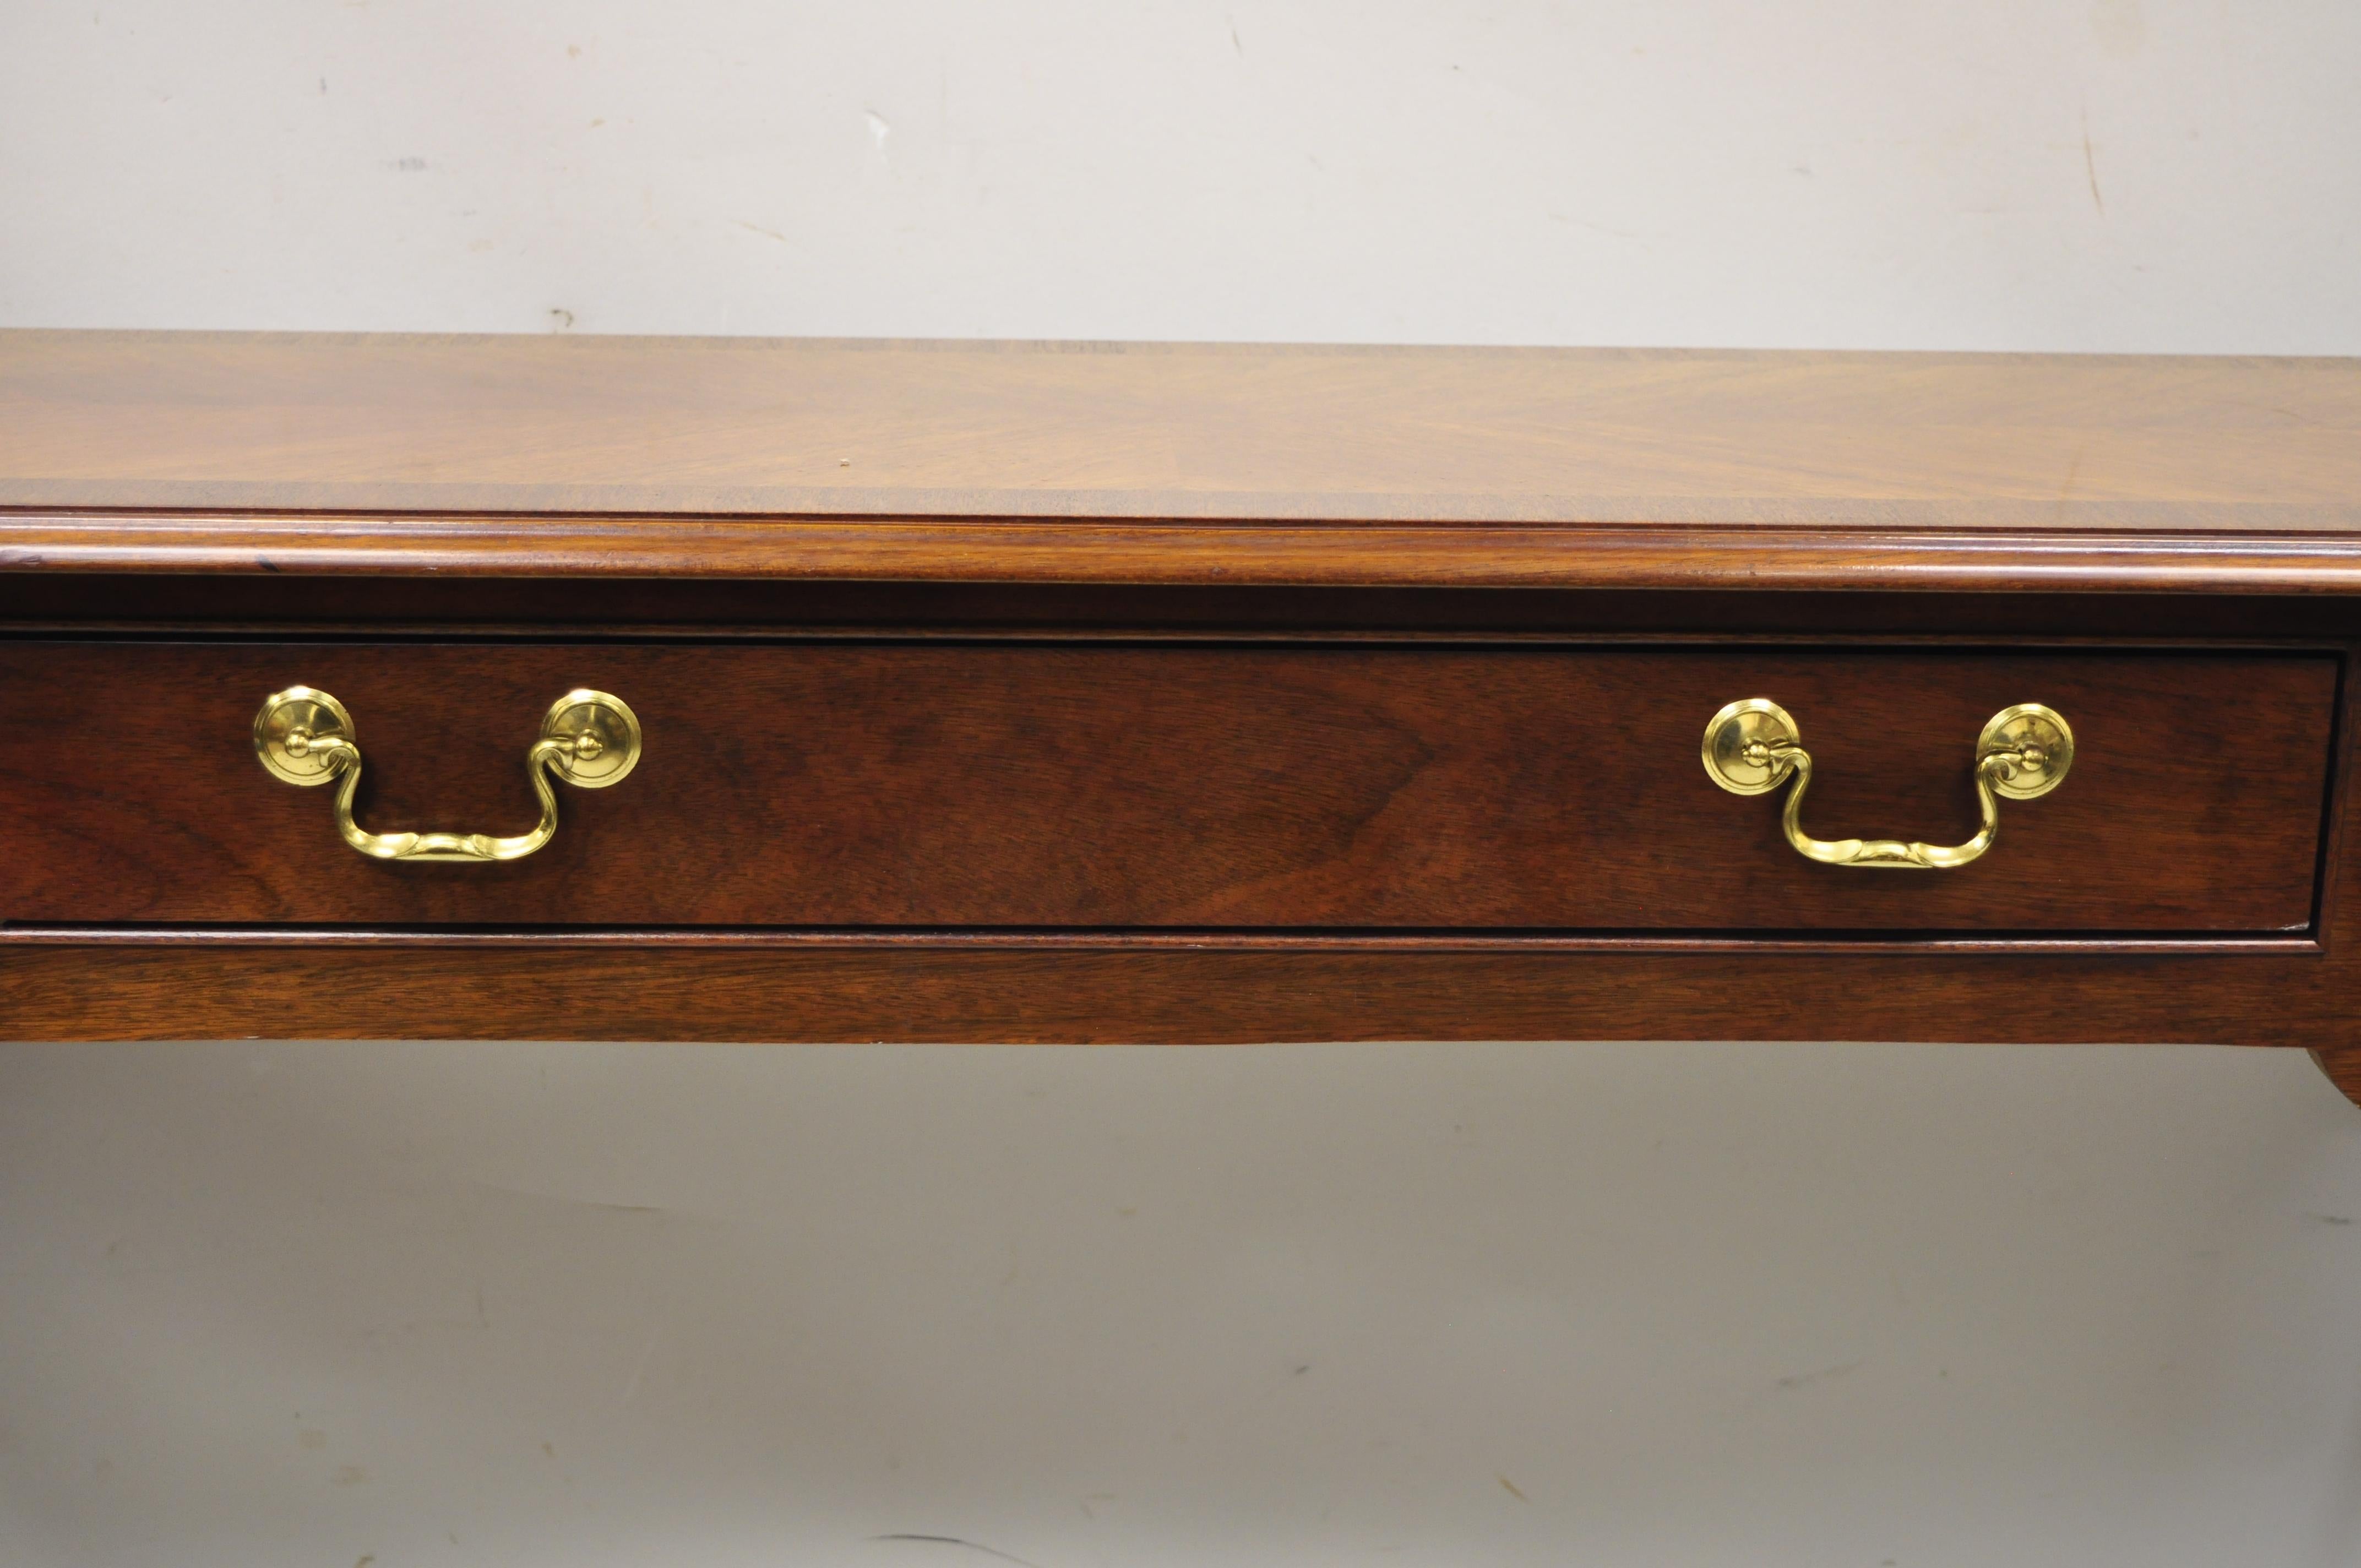 Vintage Thomasville cherry wood queen anne one drawer banded sofa console hall table. Item features finished back, original label, 1 dovetailed drawer, shapely Queen Anne legs, very nice vintage item, quality American craftsmanship, great style and